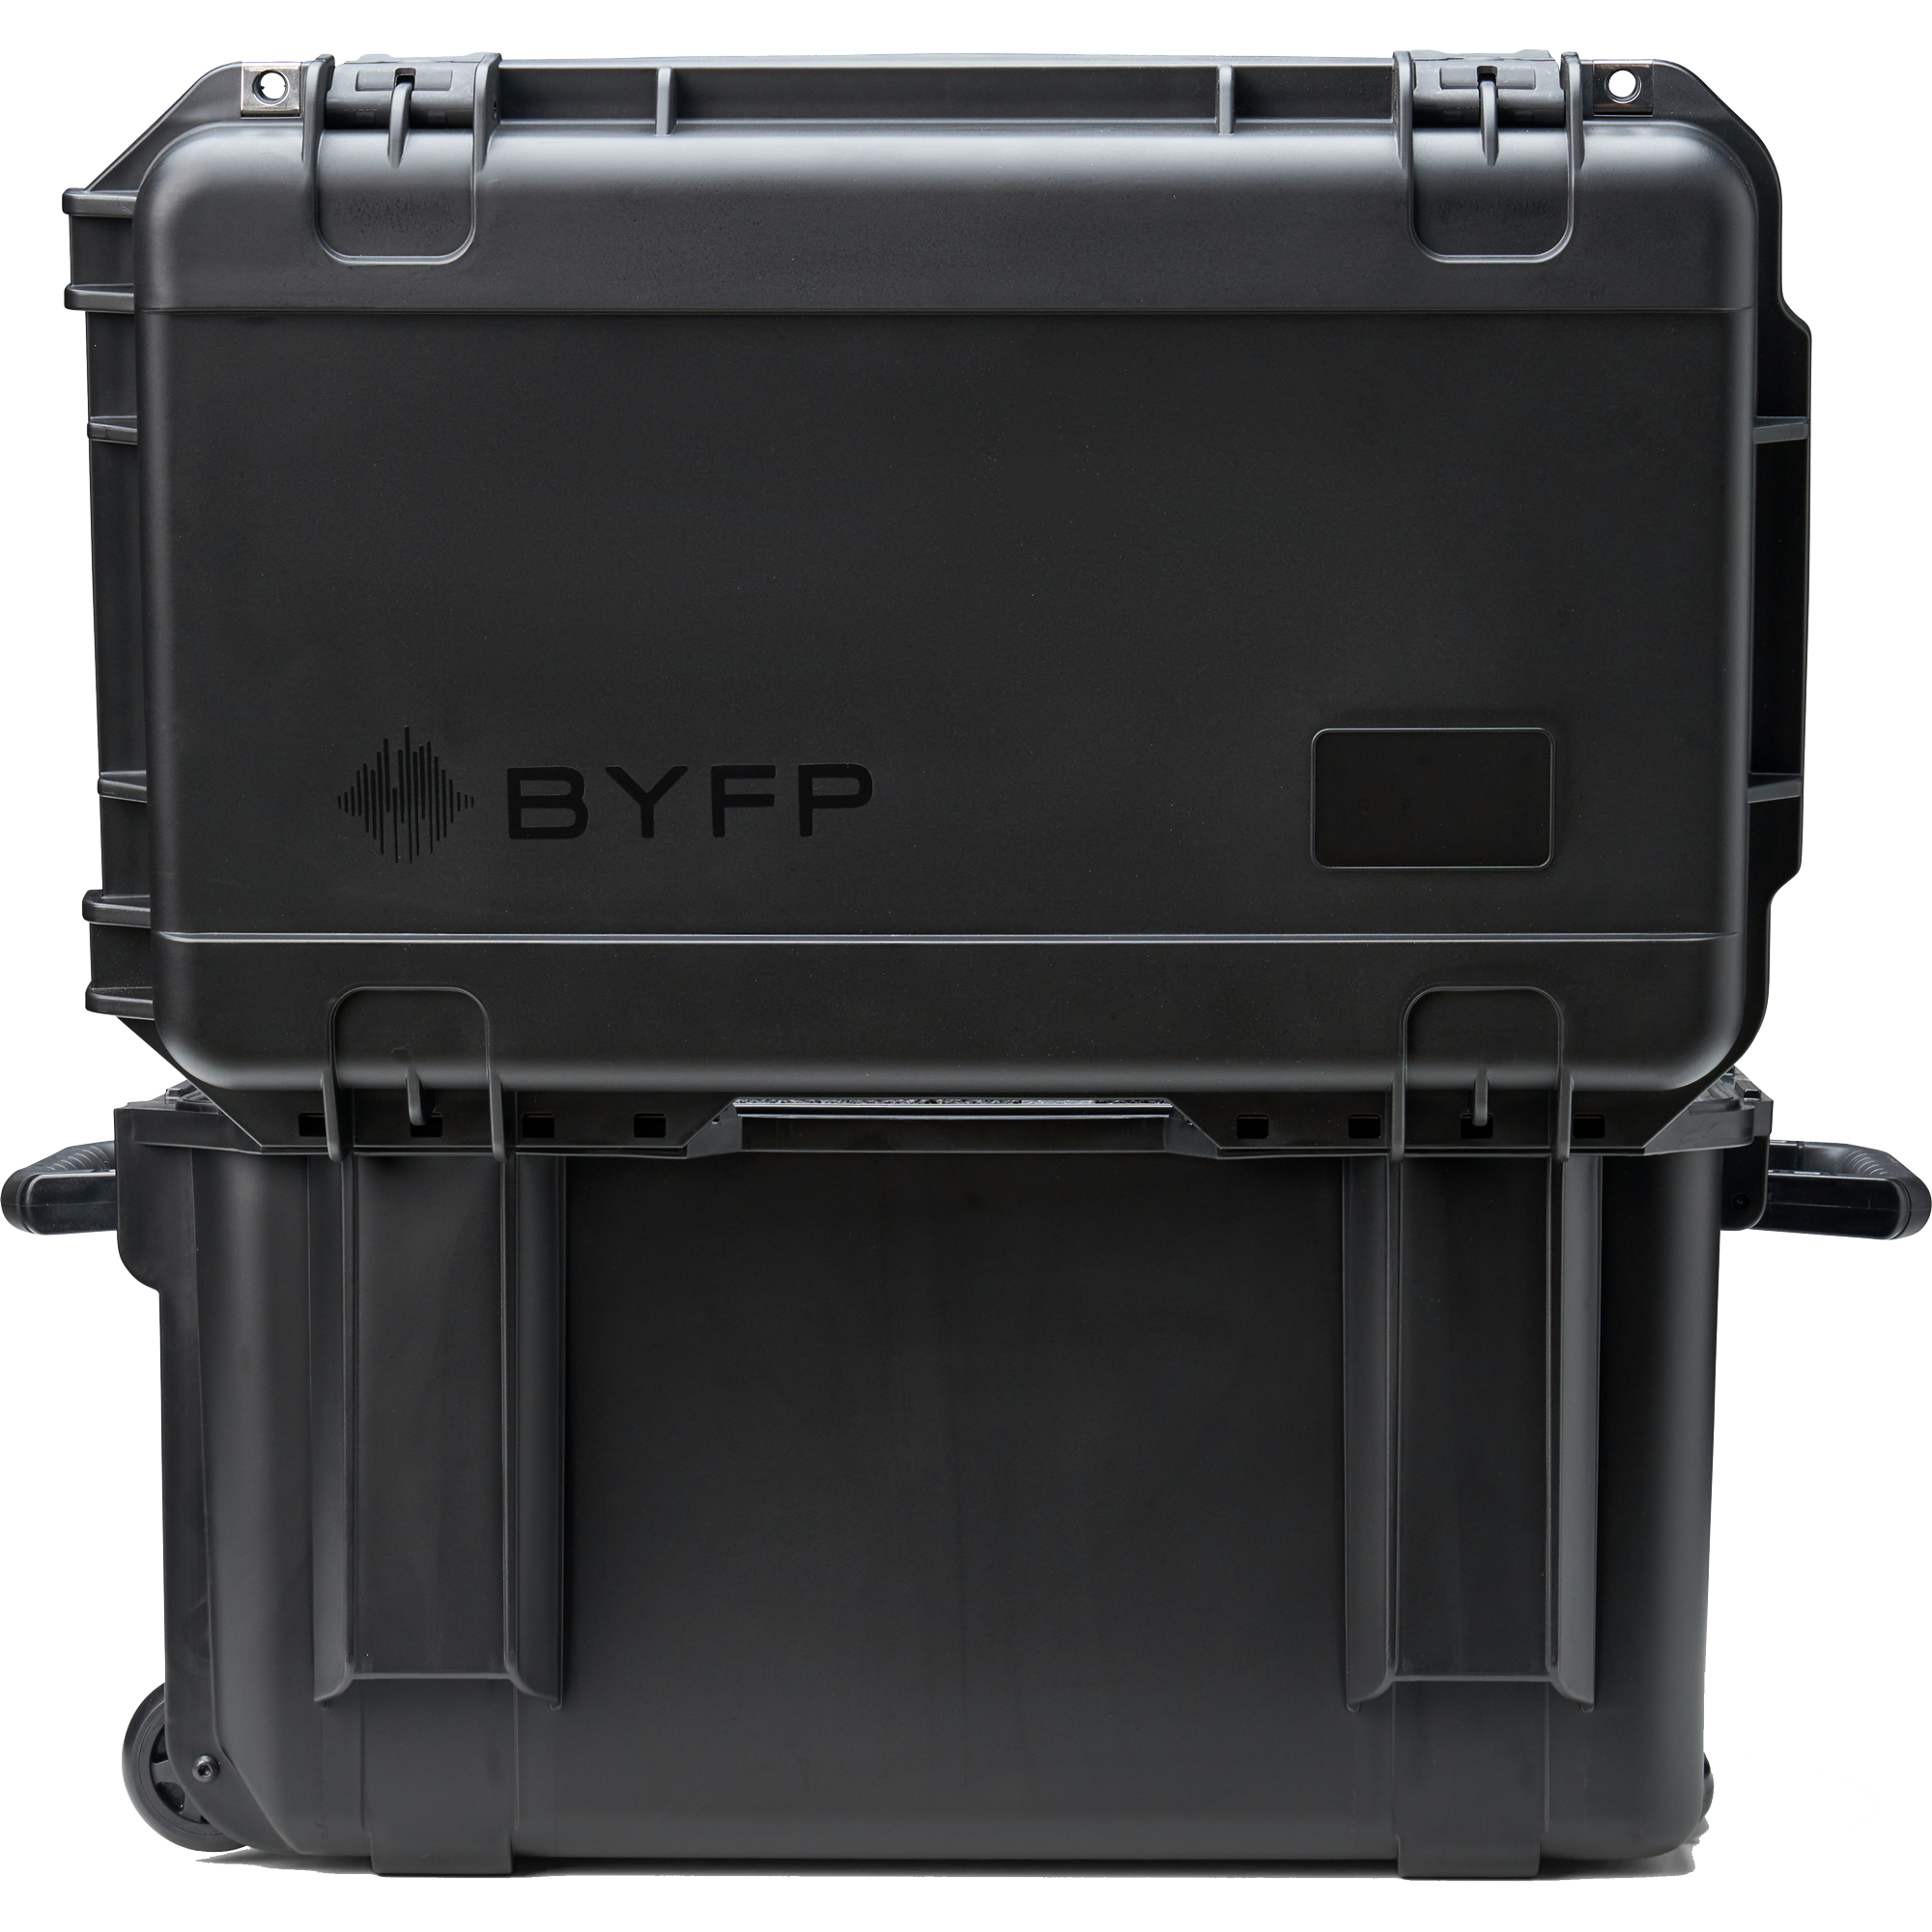 BYFP iSeries Case for 6x xVision Converters